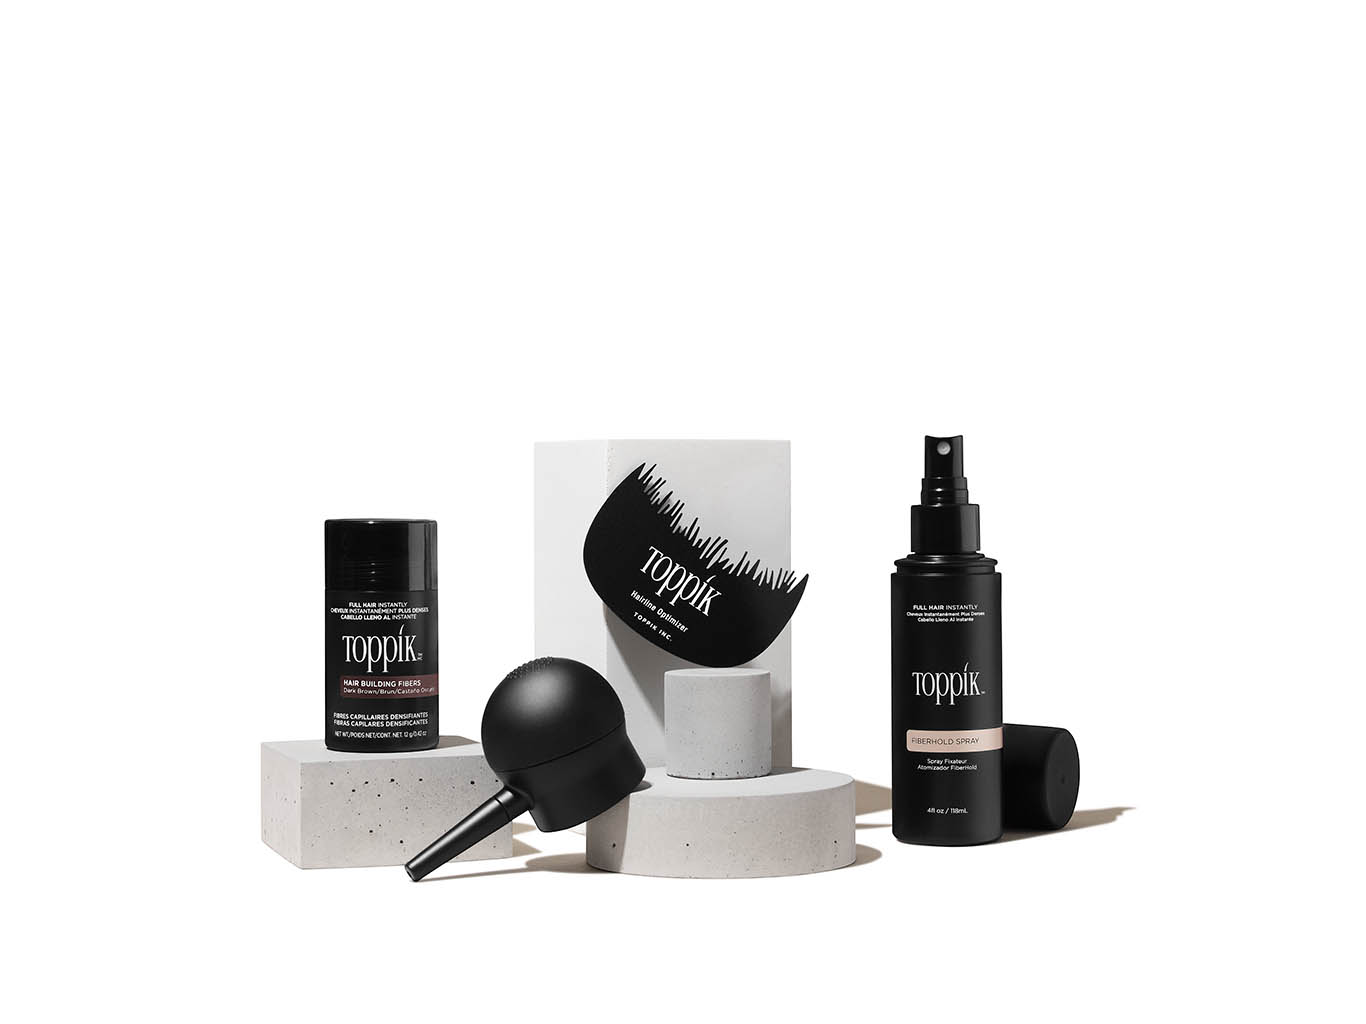 Cosmetics Photography of Toppik hair care products by Packshot Factory